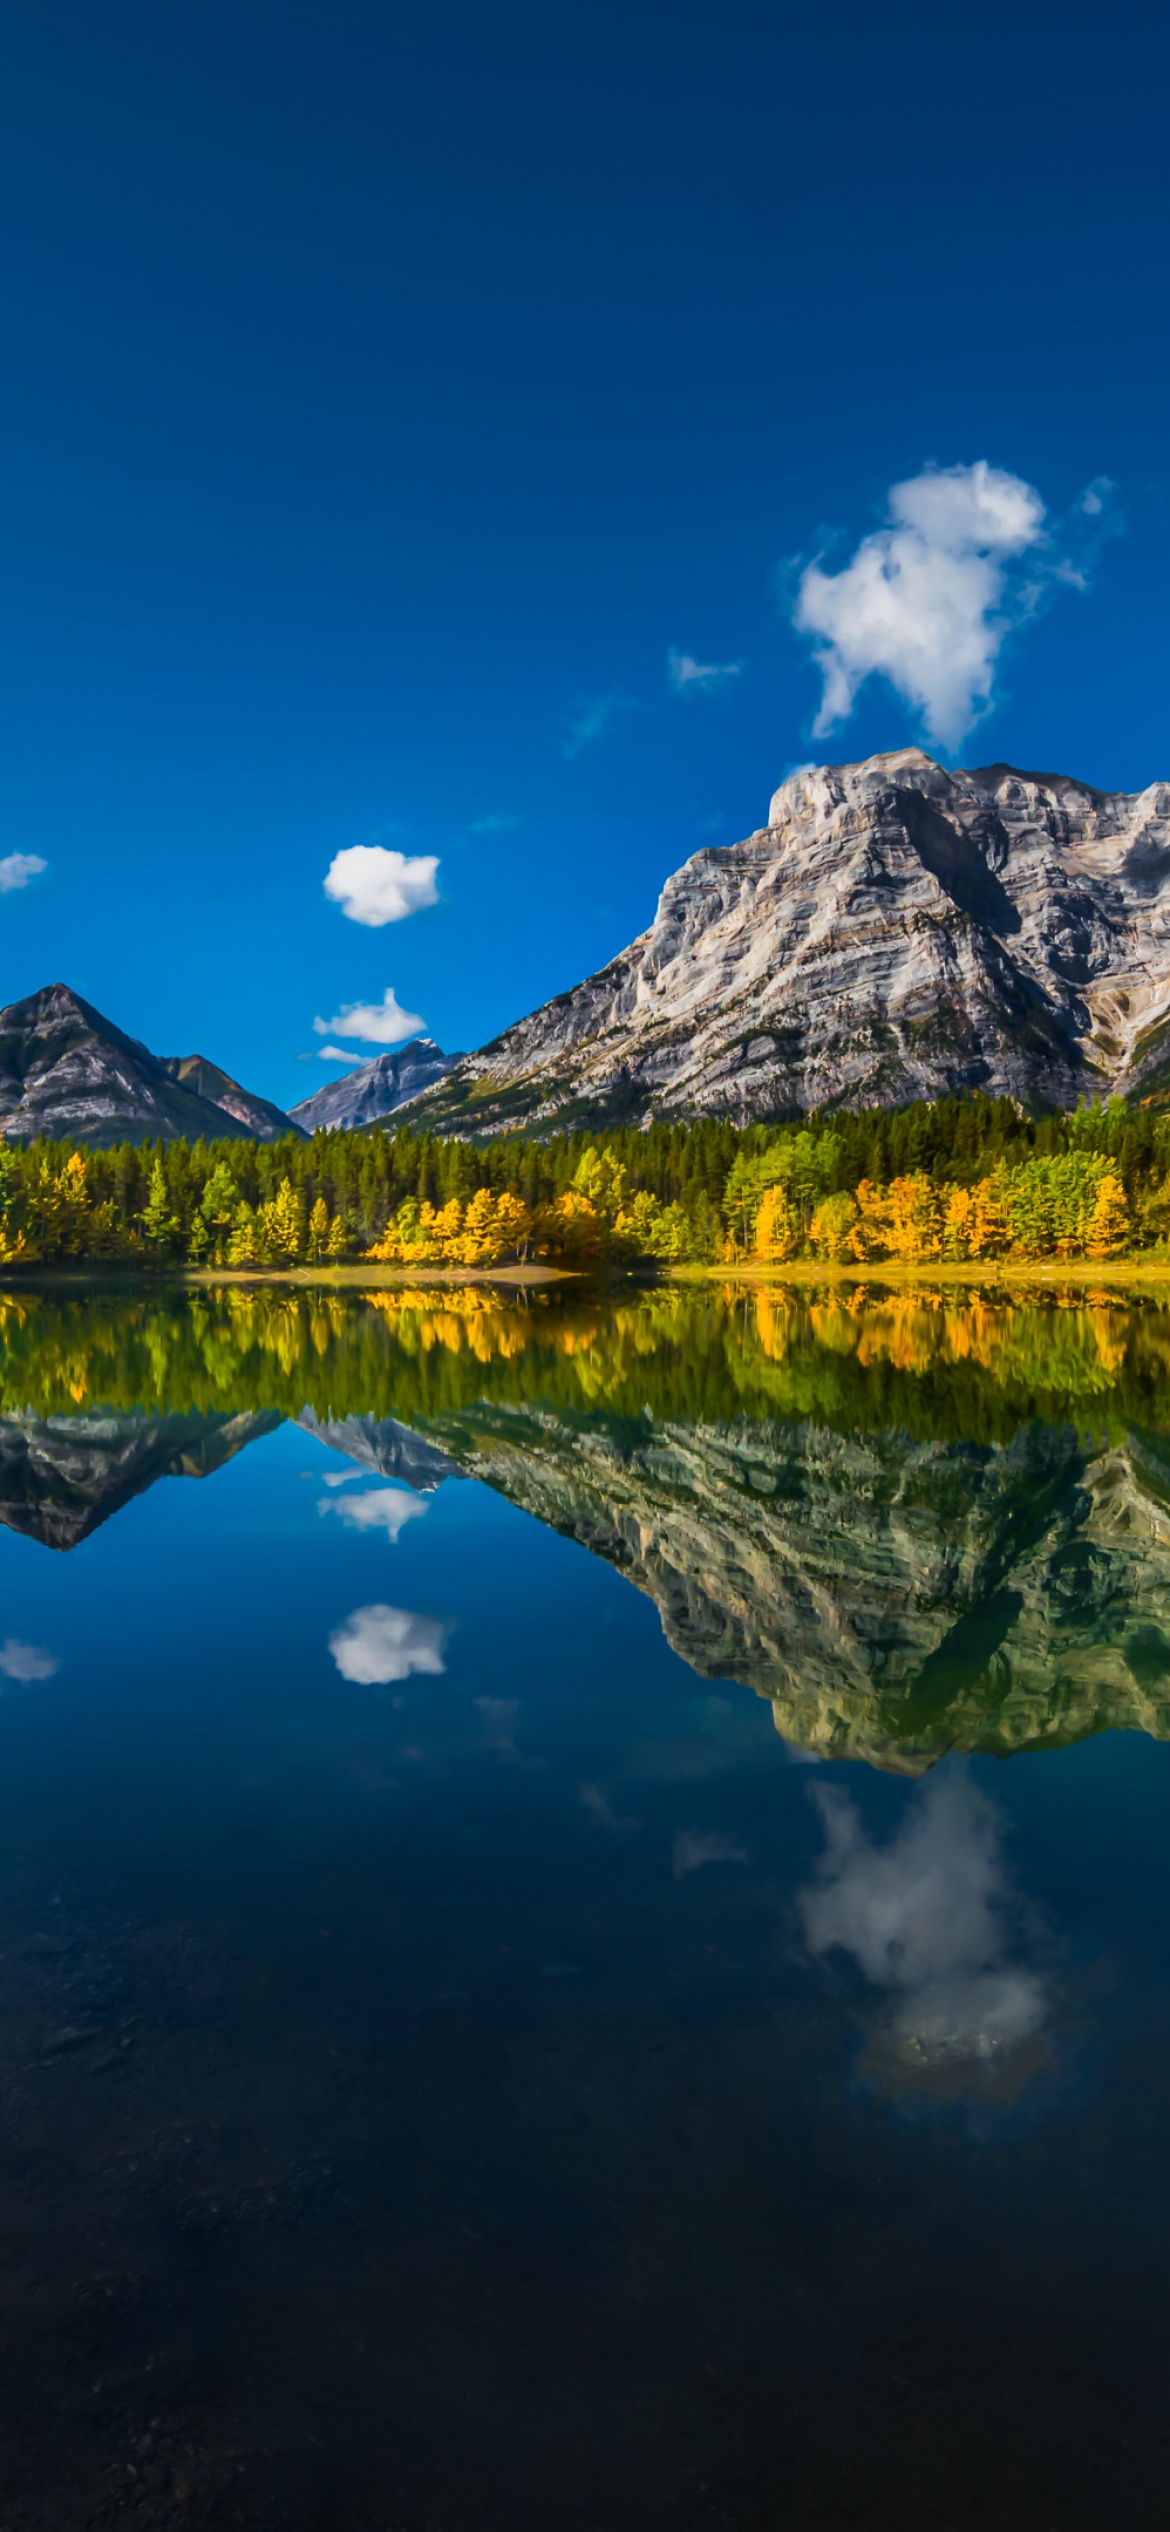 Wedge Pond Wallpaper 4K, Canada, Clear sky, Reflection, Mountains